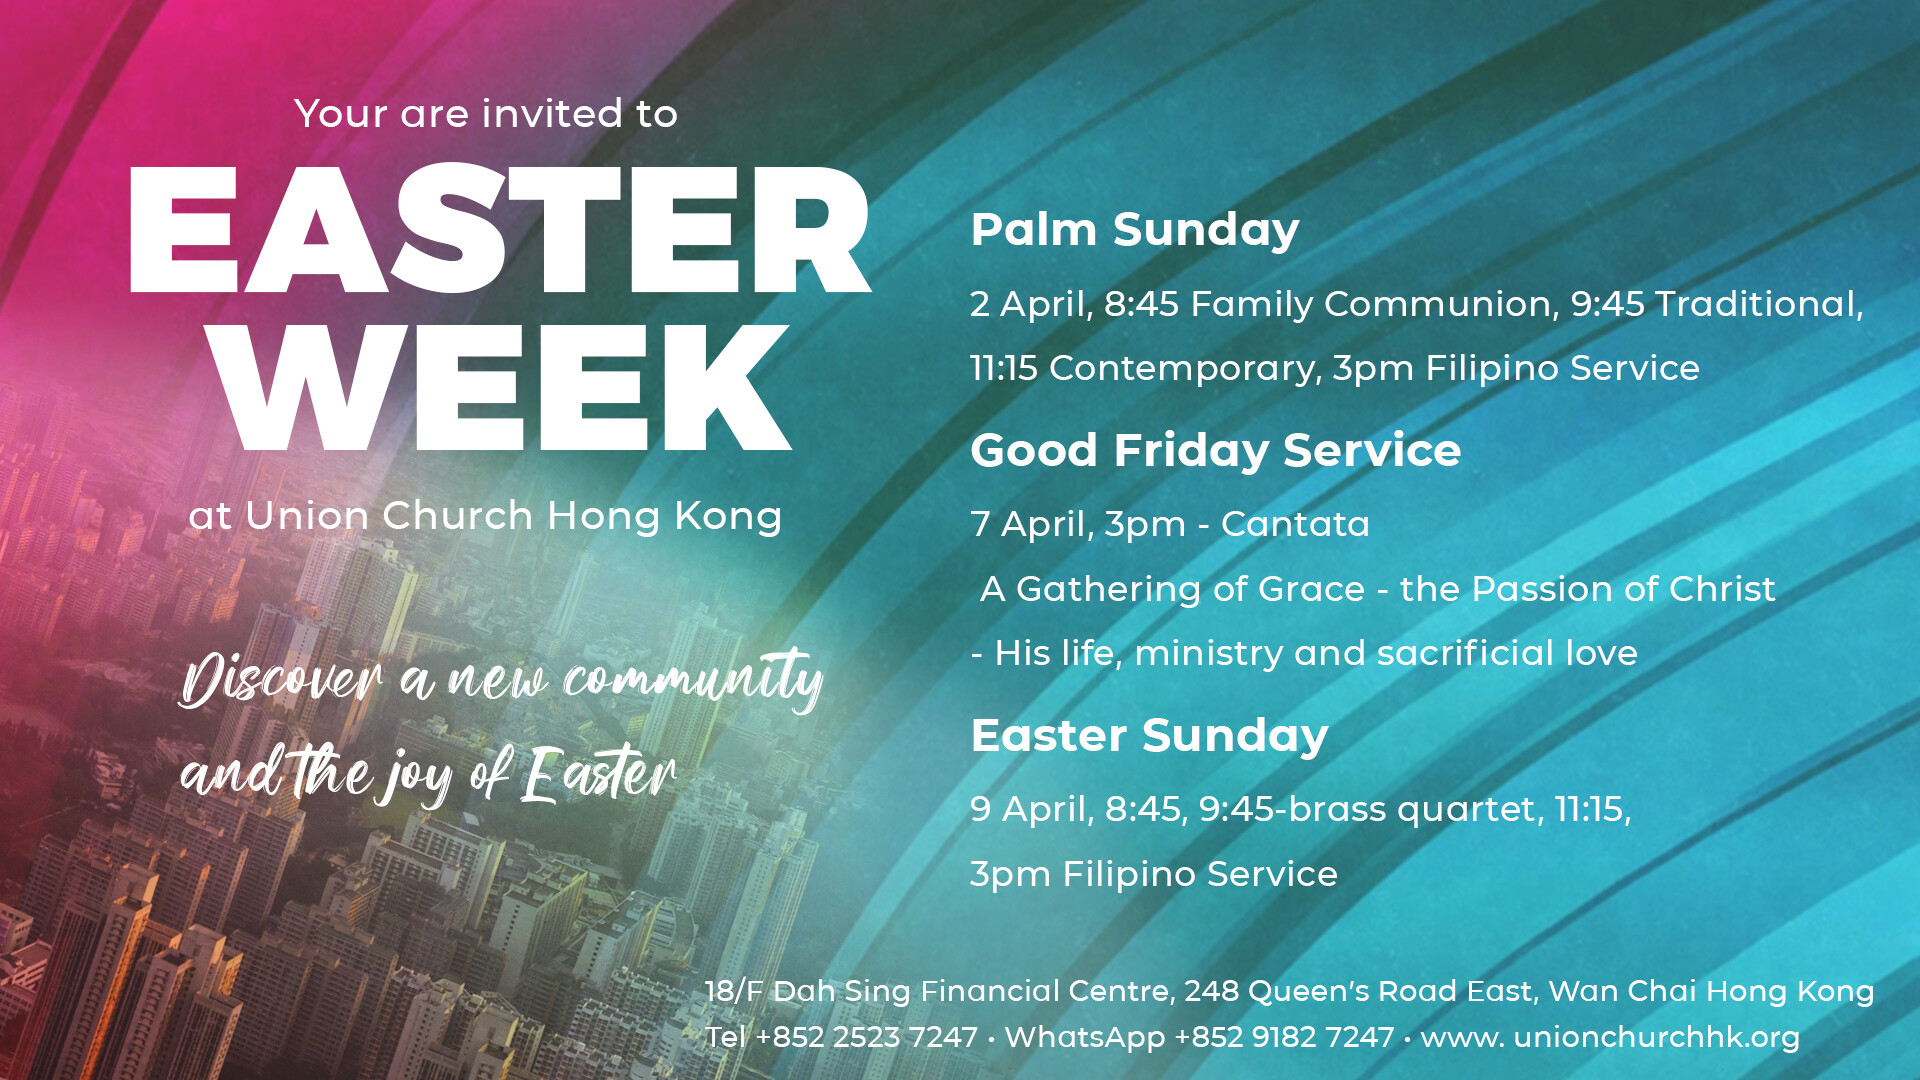 Easter Week at Union Church